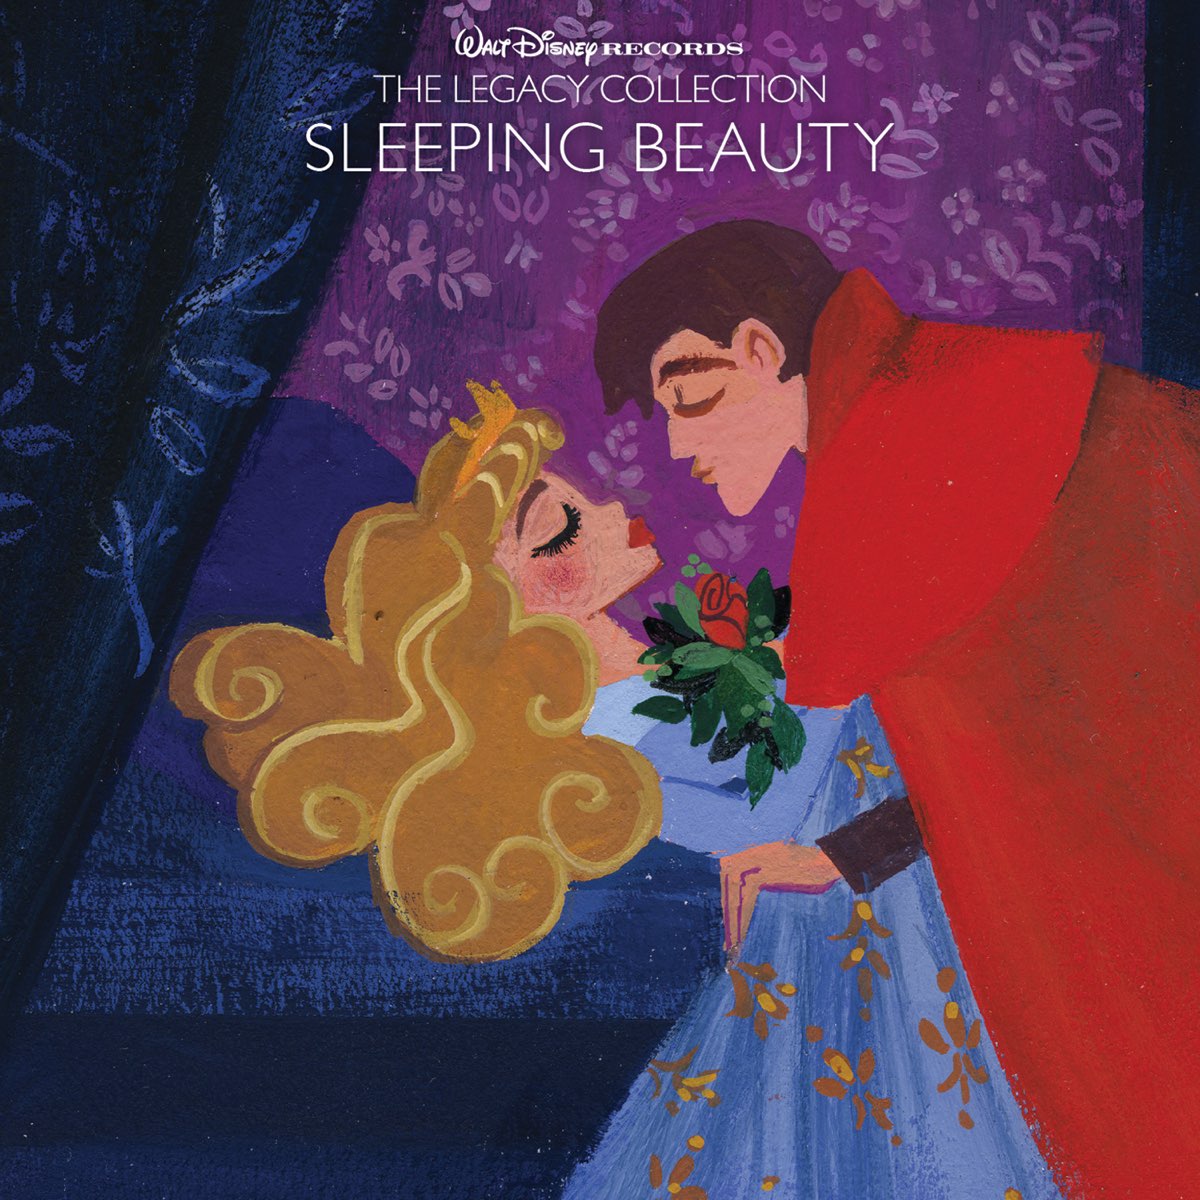 ‎walt Disney Records The Legacy Collection Sleeping Beauty By Various Artists On Apple Music